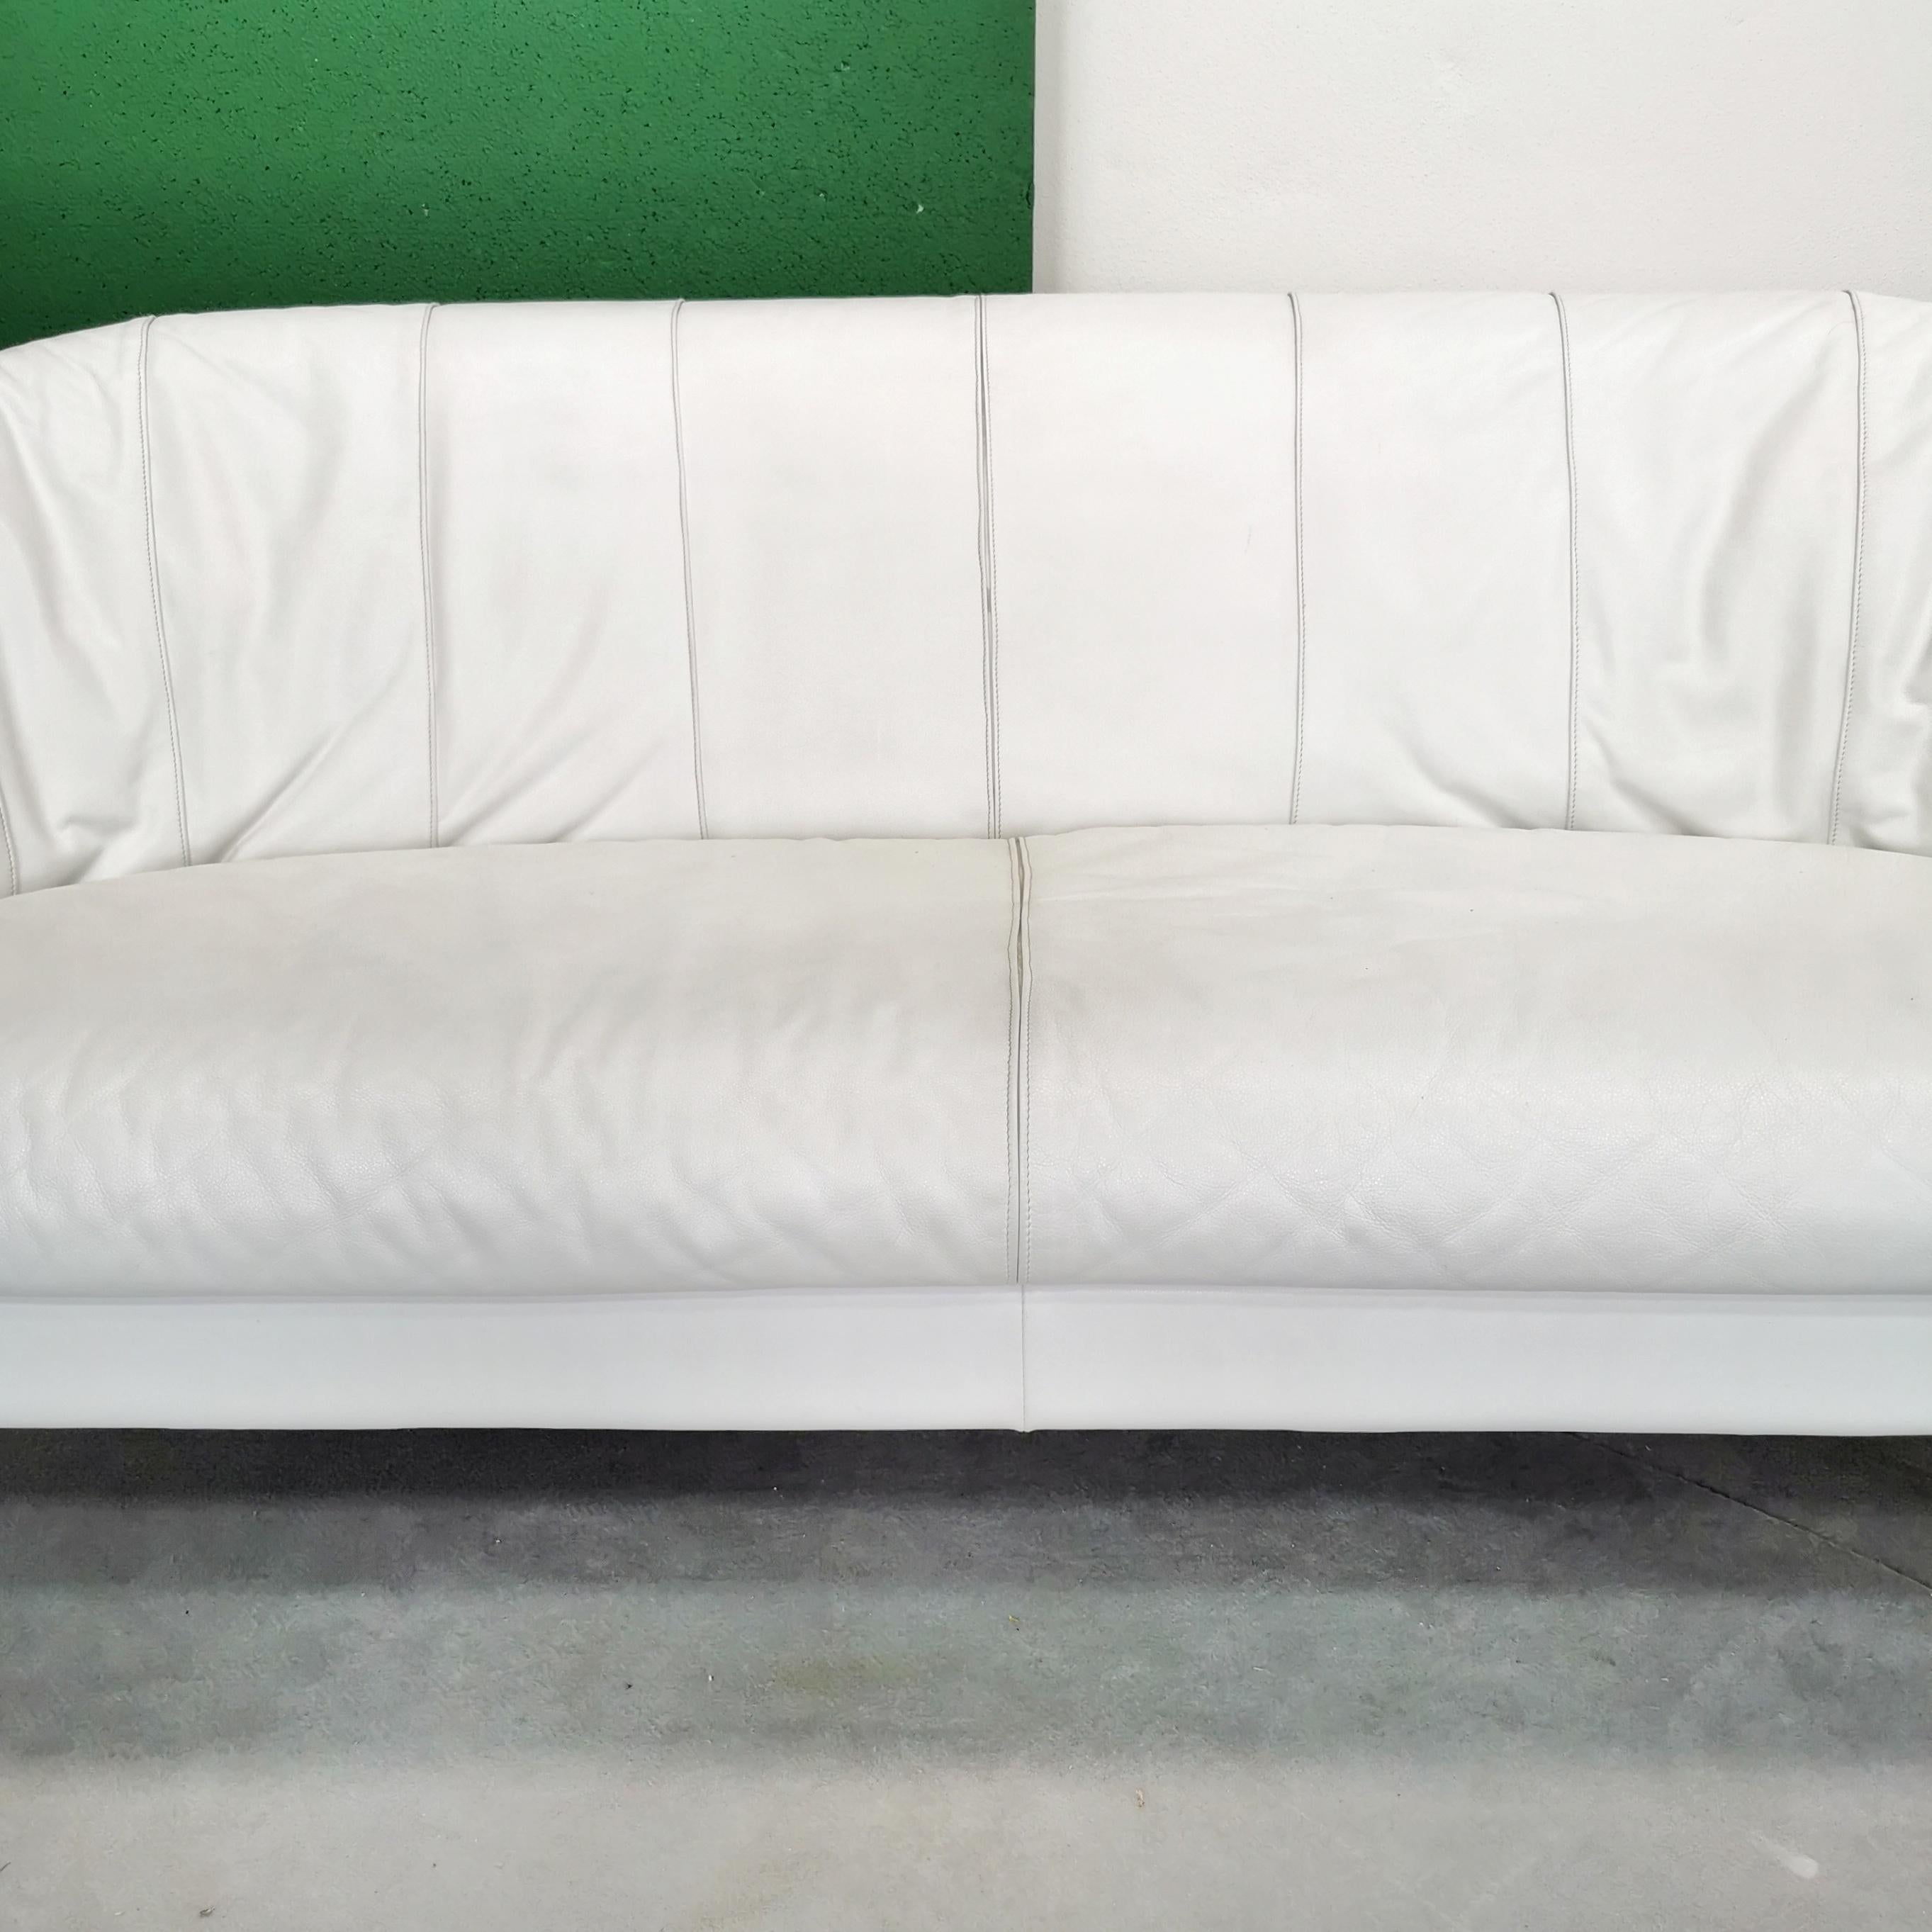 1980s white leather sofa manufactured by Marac In Good Condition For Sale In Milano, MI